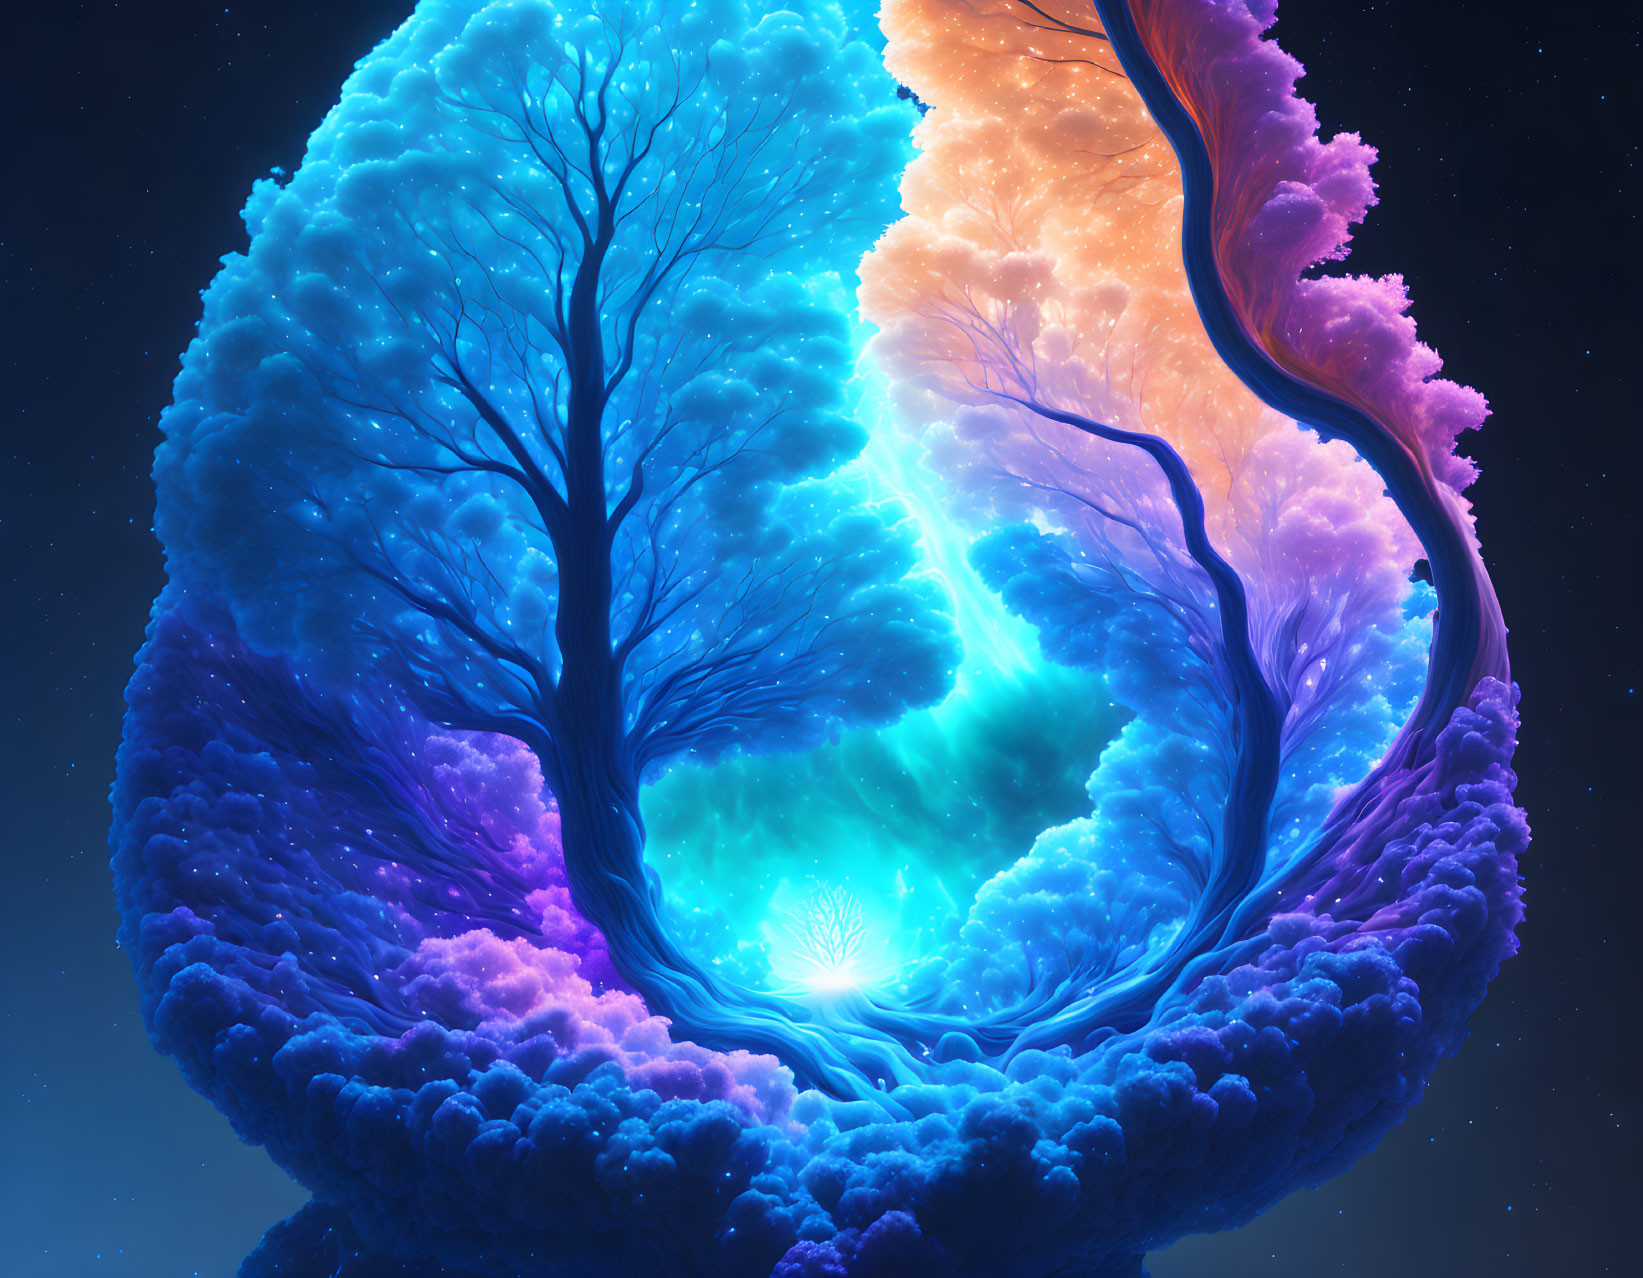 Colorful digital artwork of neon trees around star-filled center